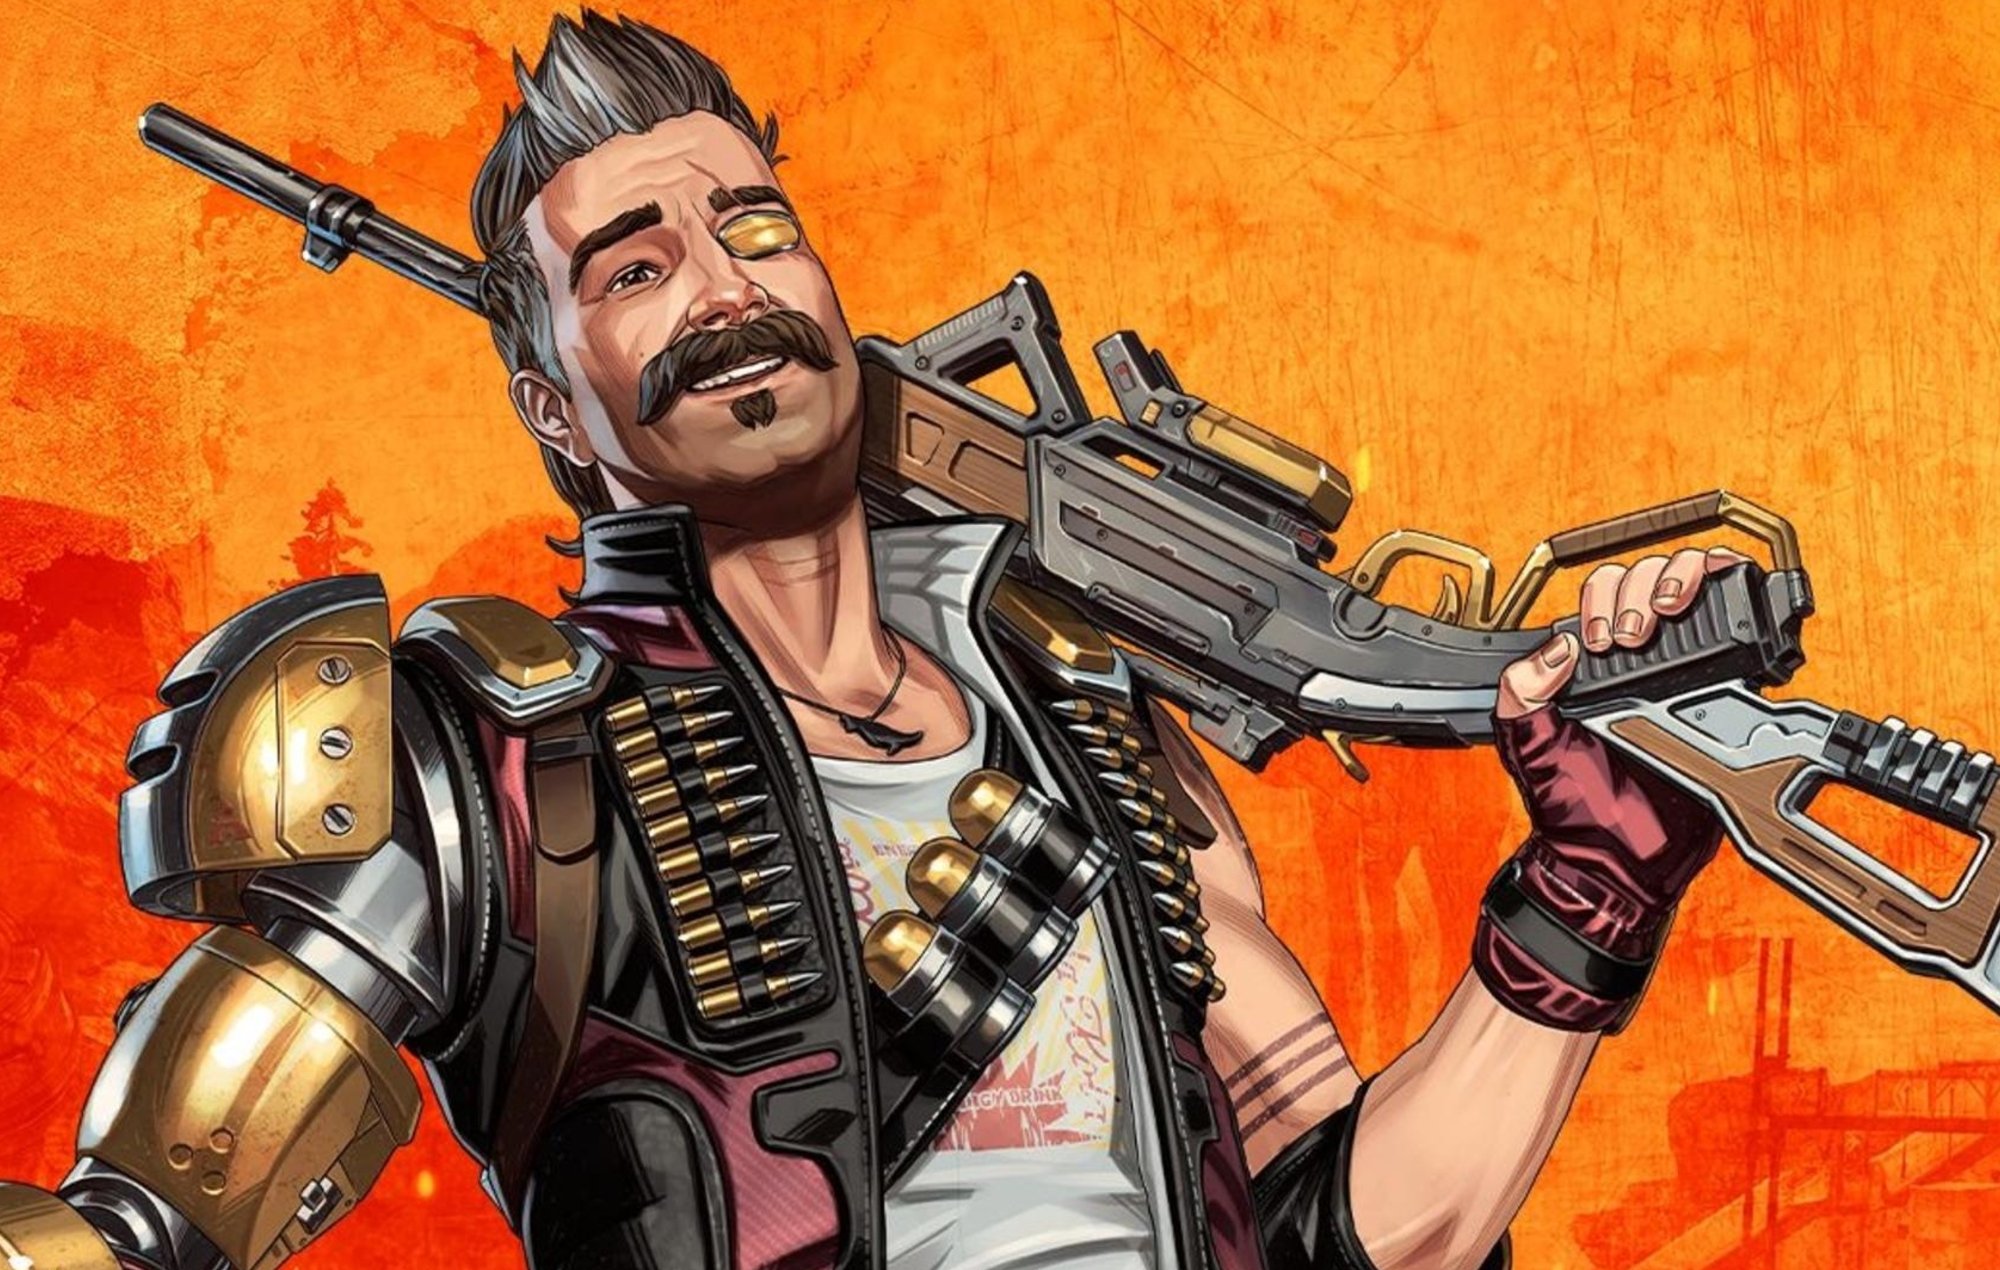 Fuse Trailer Gives The First Look At The Explosive New Character Arriving In Apex Legends Season 8